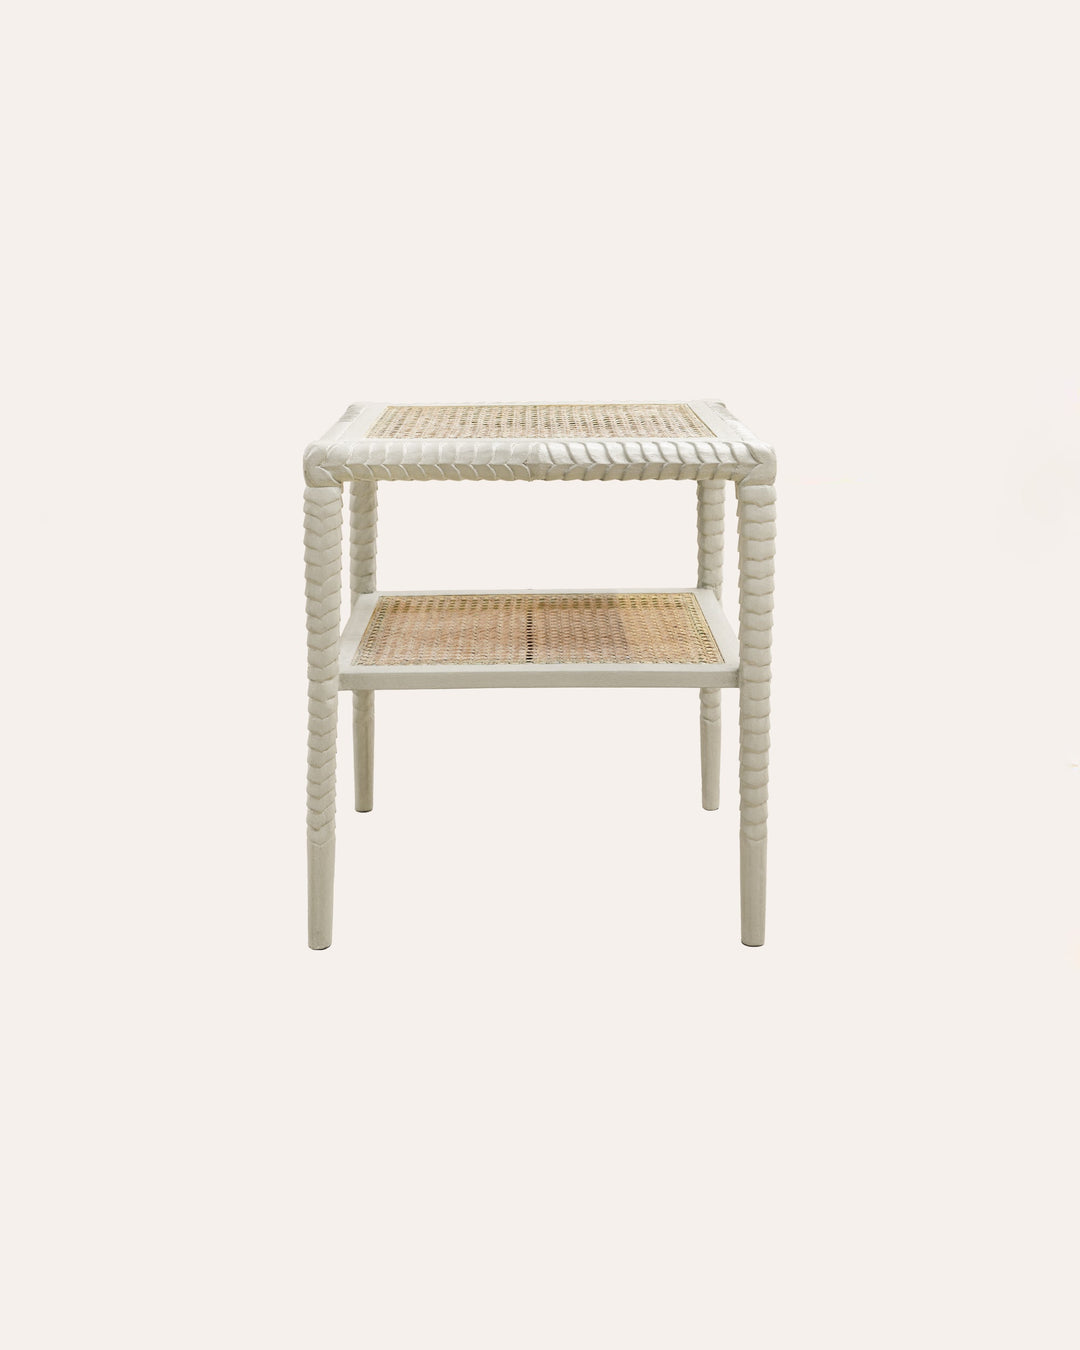 Pavilion Wooden Side Table - Taupe